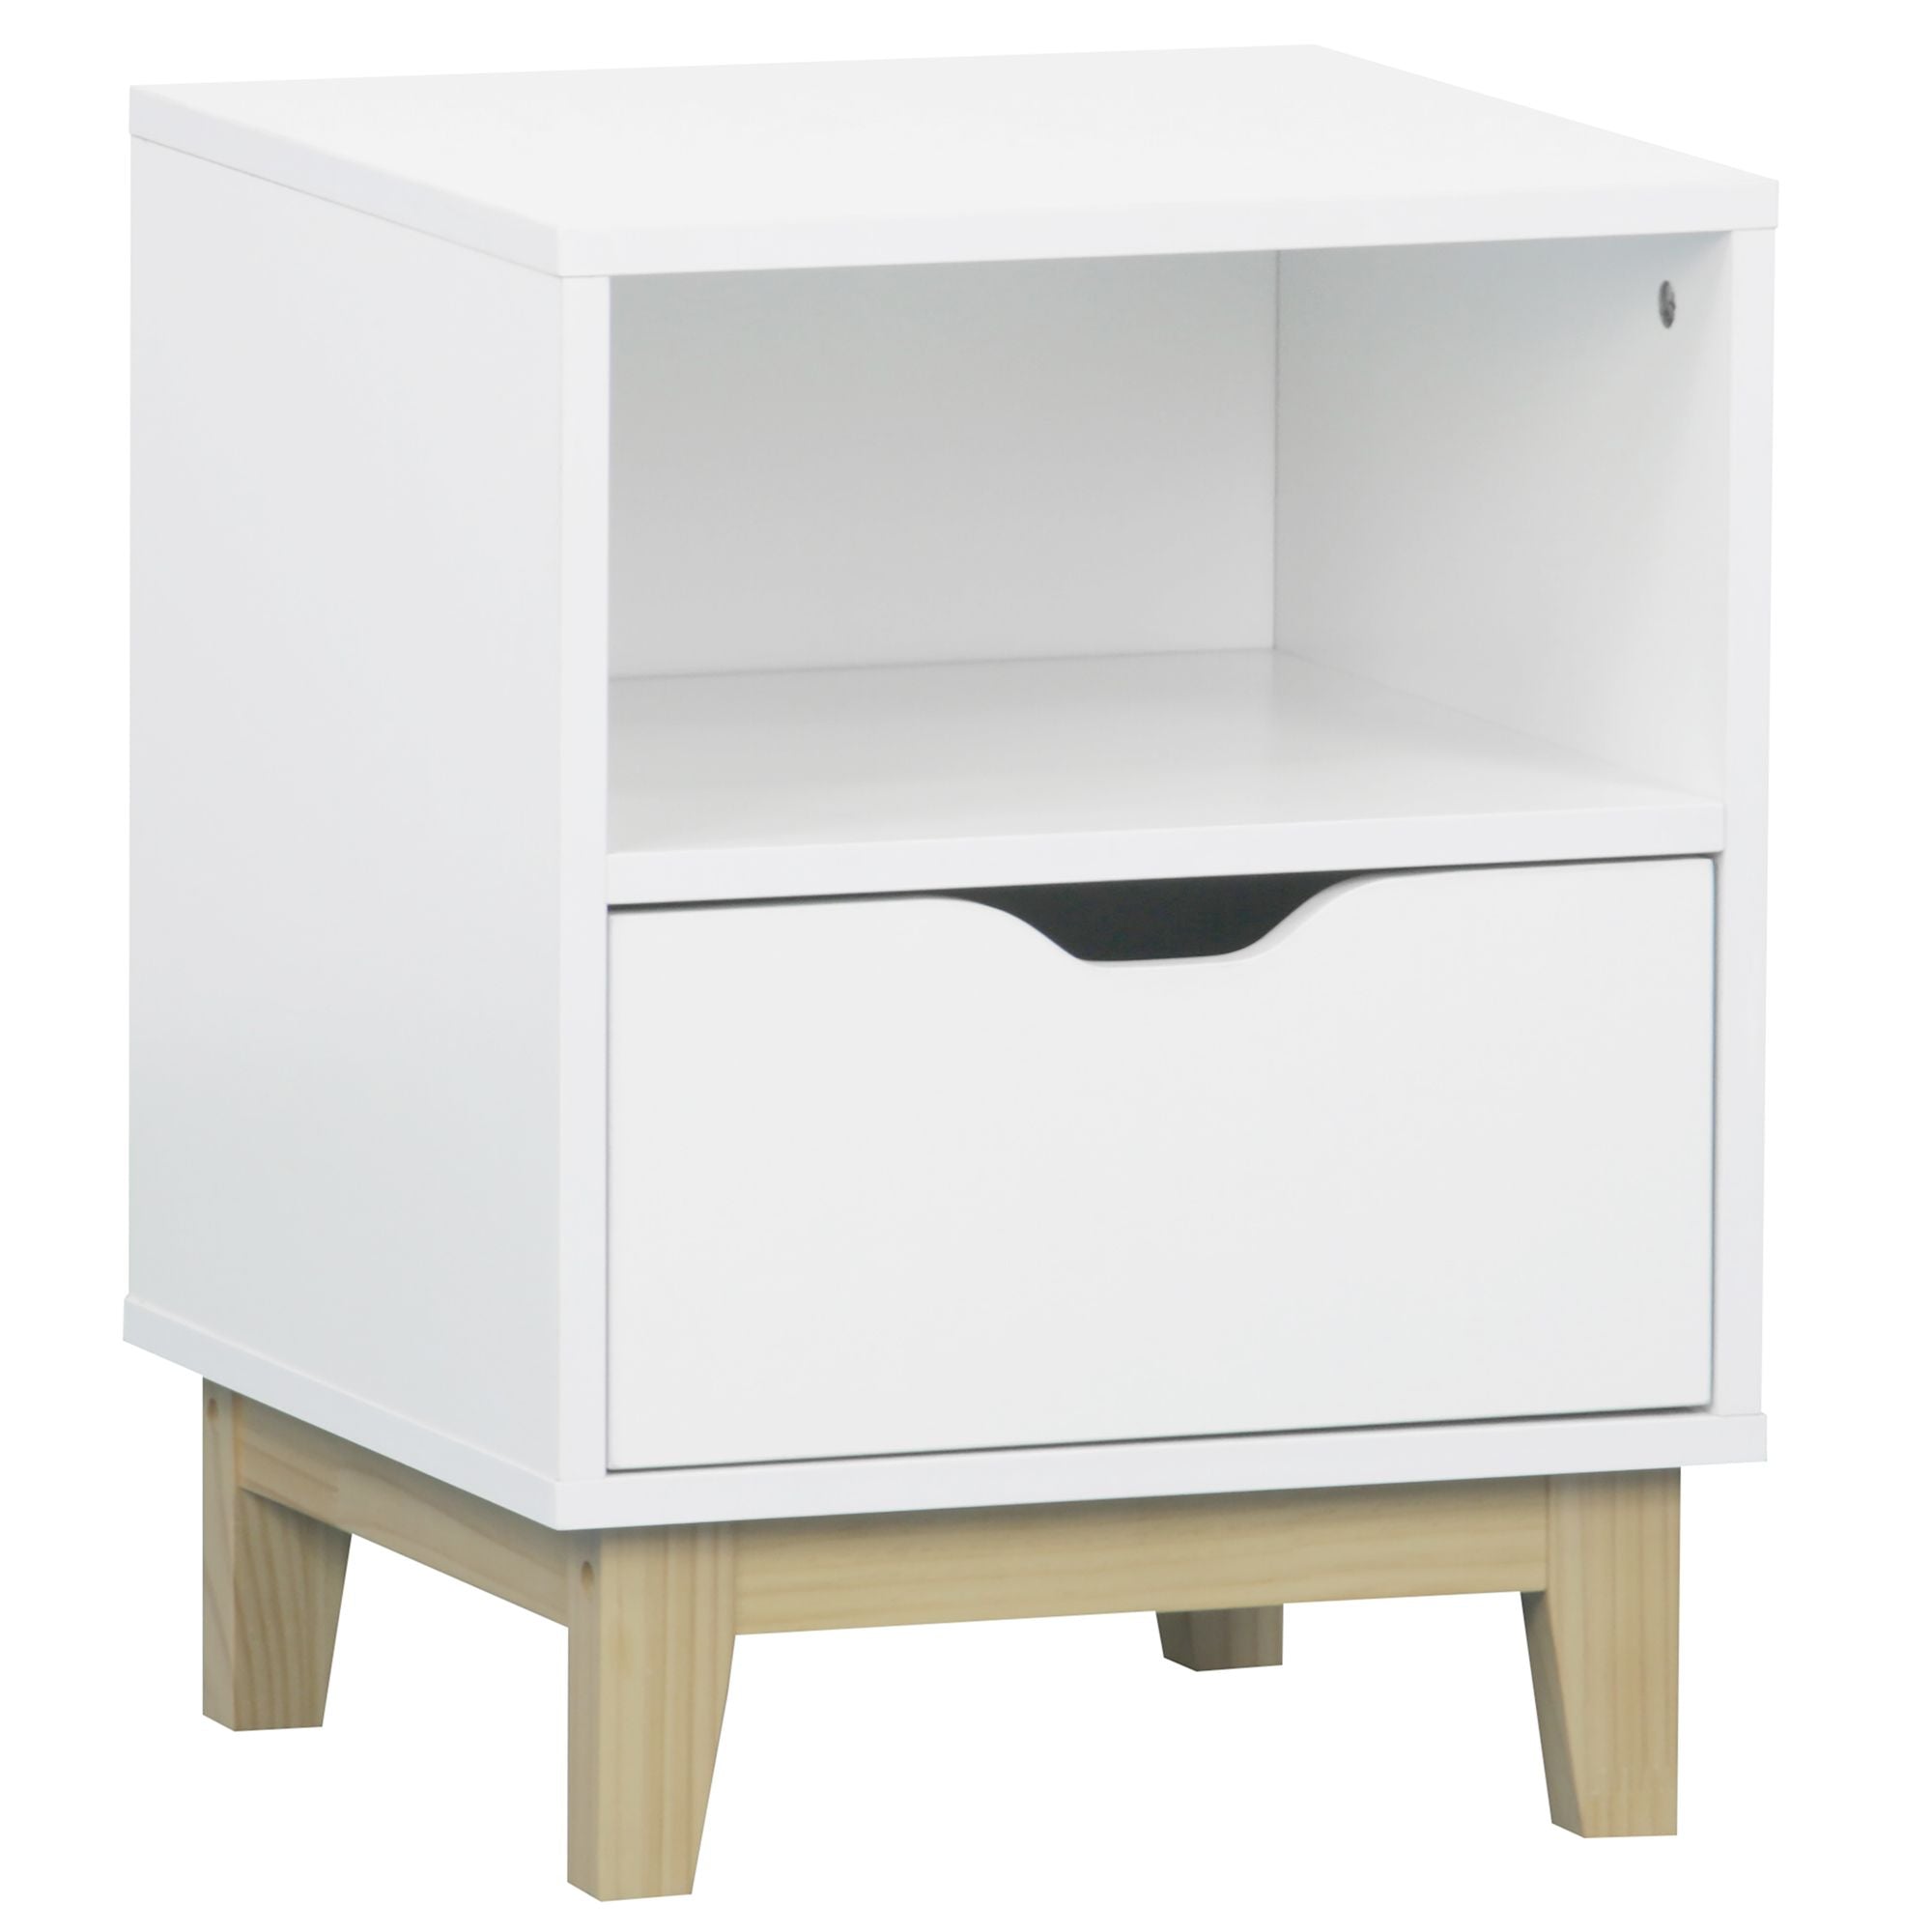 Image shows Scandinavian Bedside Table from cross angle 